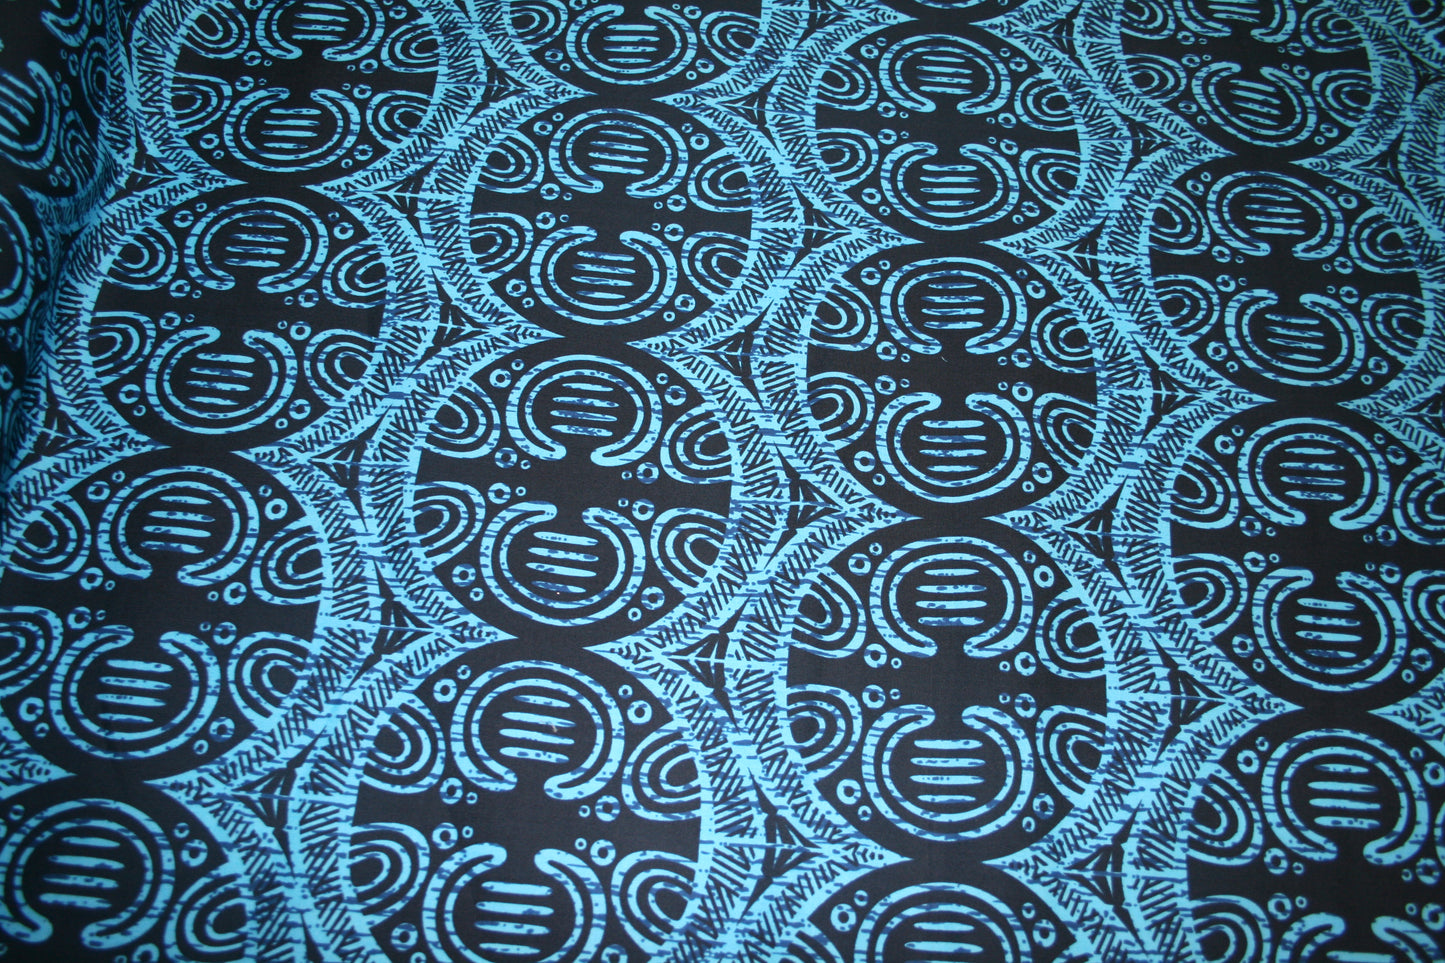 Ocean Blue Shell From The Sea Fabric